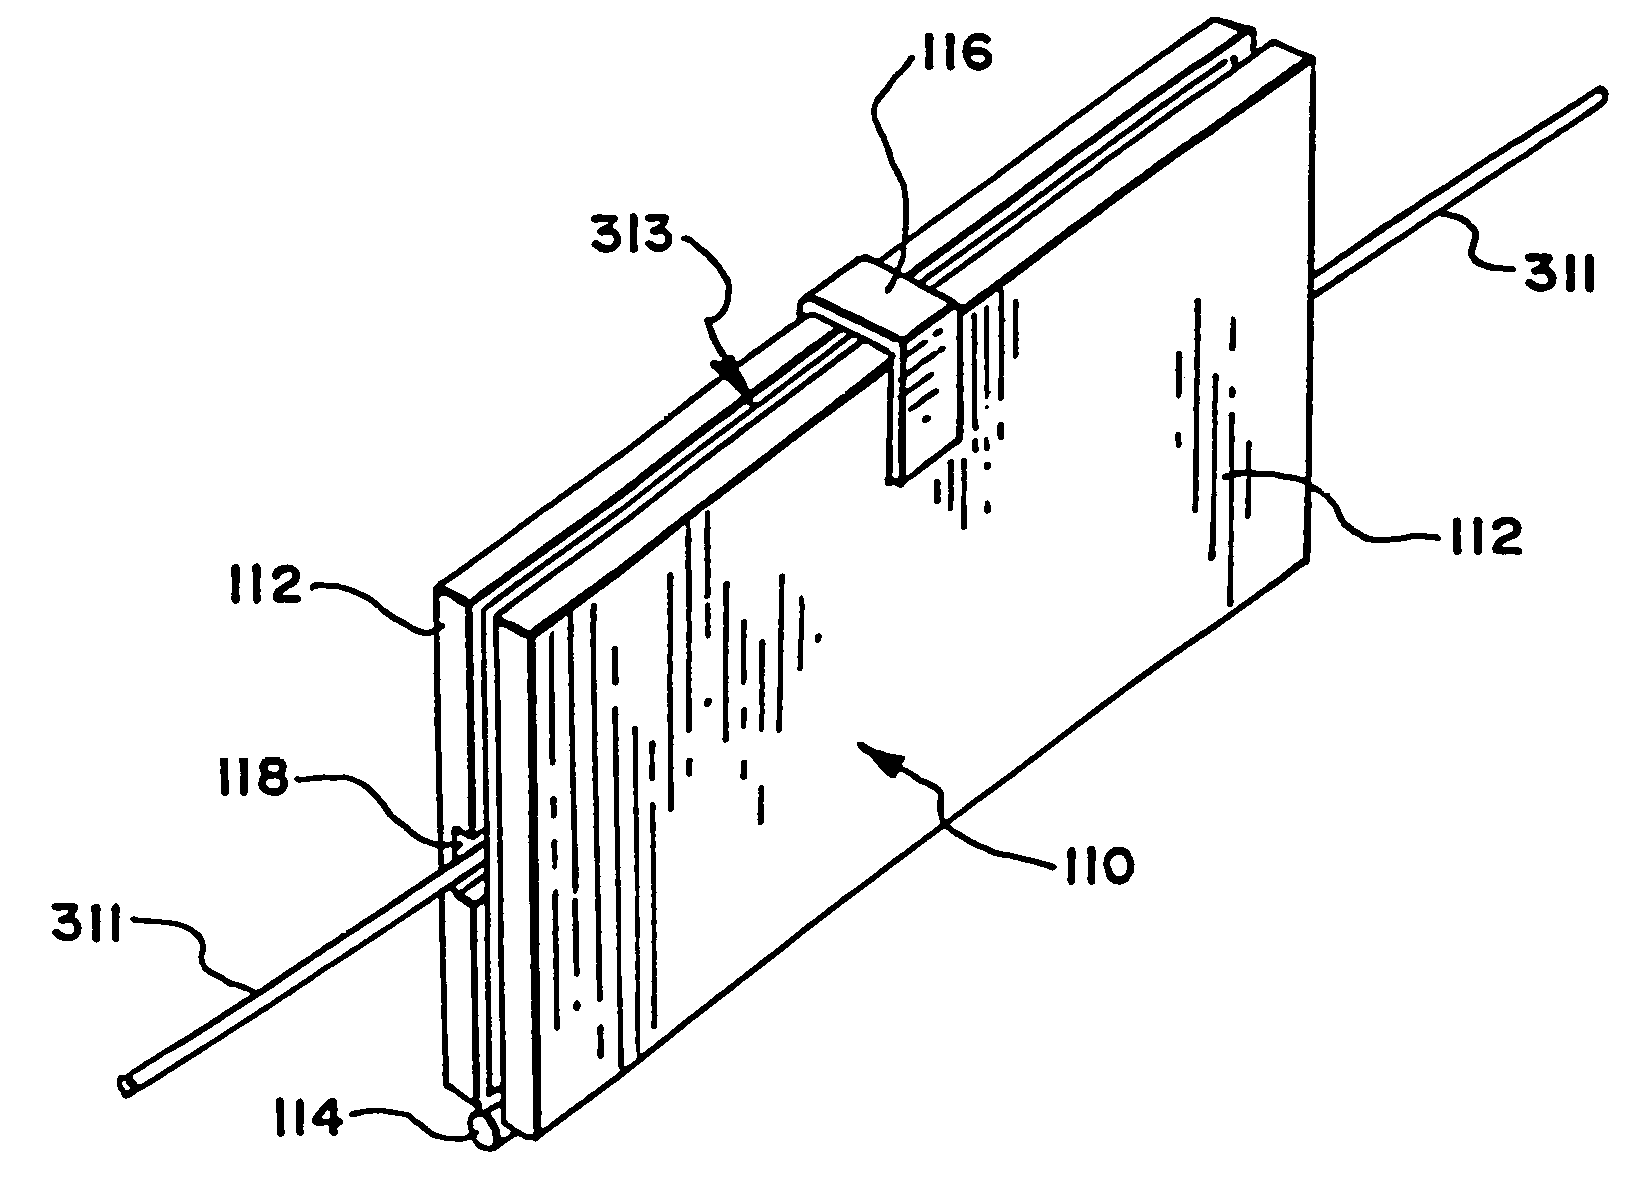 Blood processing systems and methods that employ an in-line, flexible leukofilter